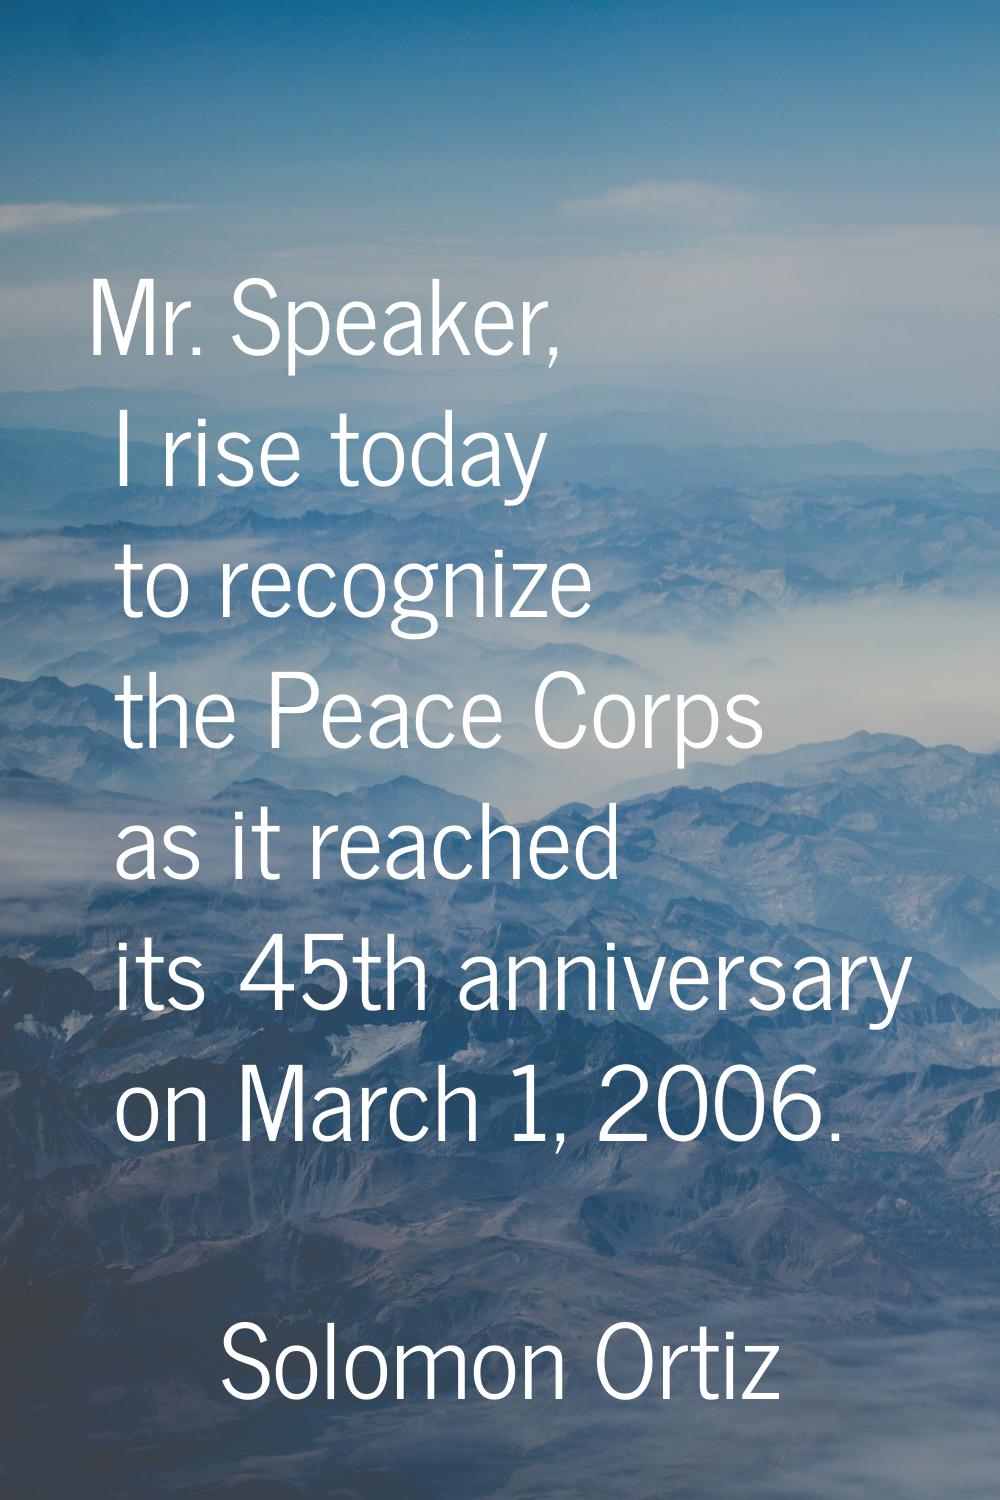 Mr. Speaker, I rise today to recognize the Peace Corps as it reached its 45th anniversary on March 